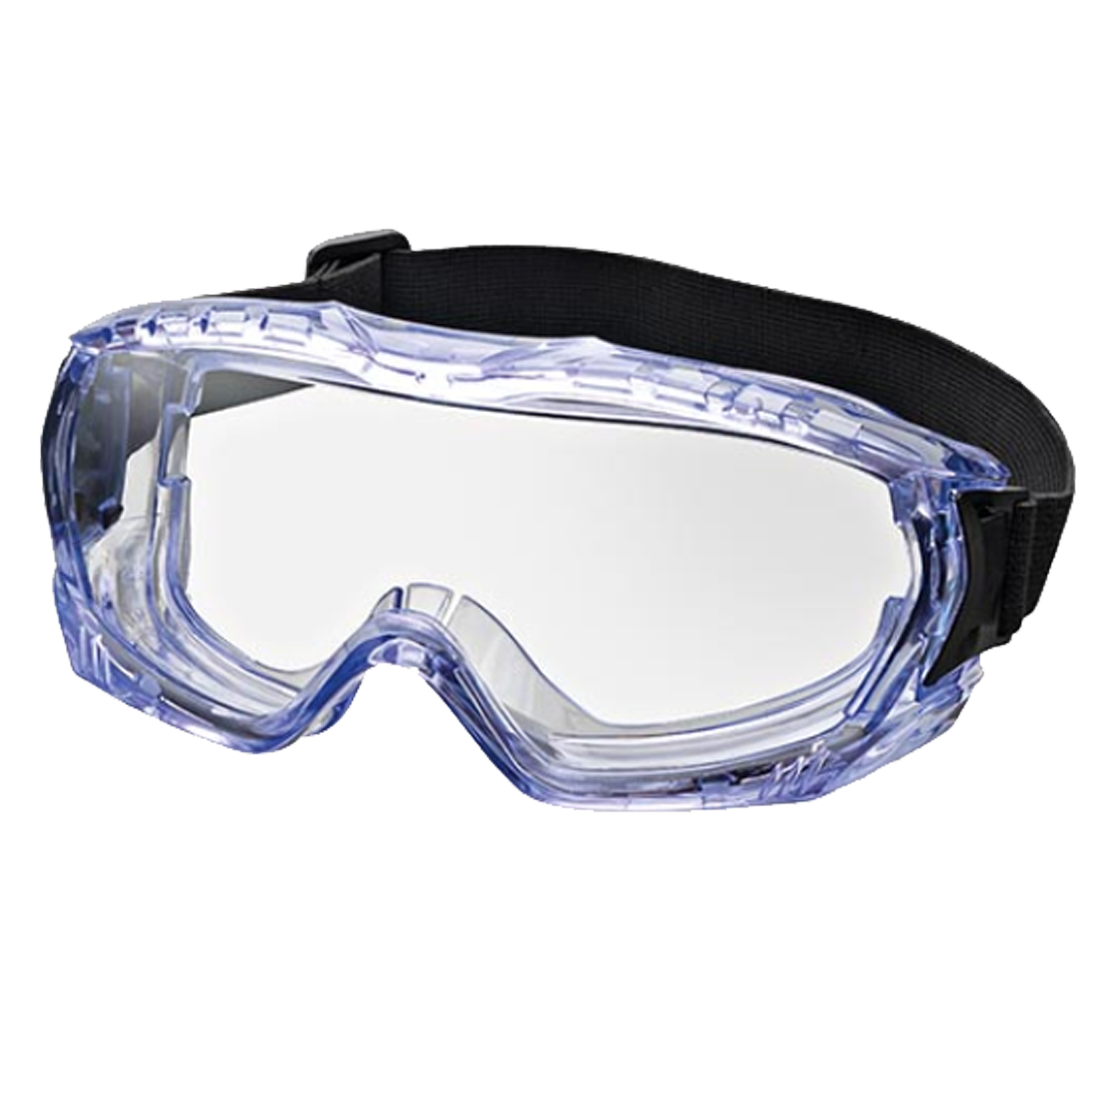 EXCALIBUR GOGGLES CLEAR LENS AND FRAME